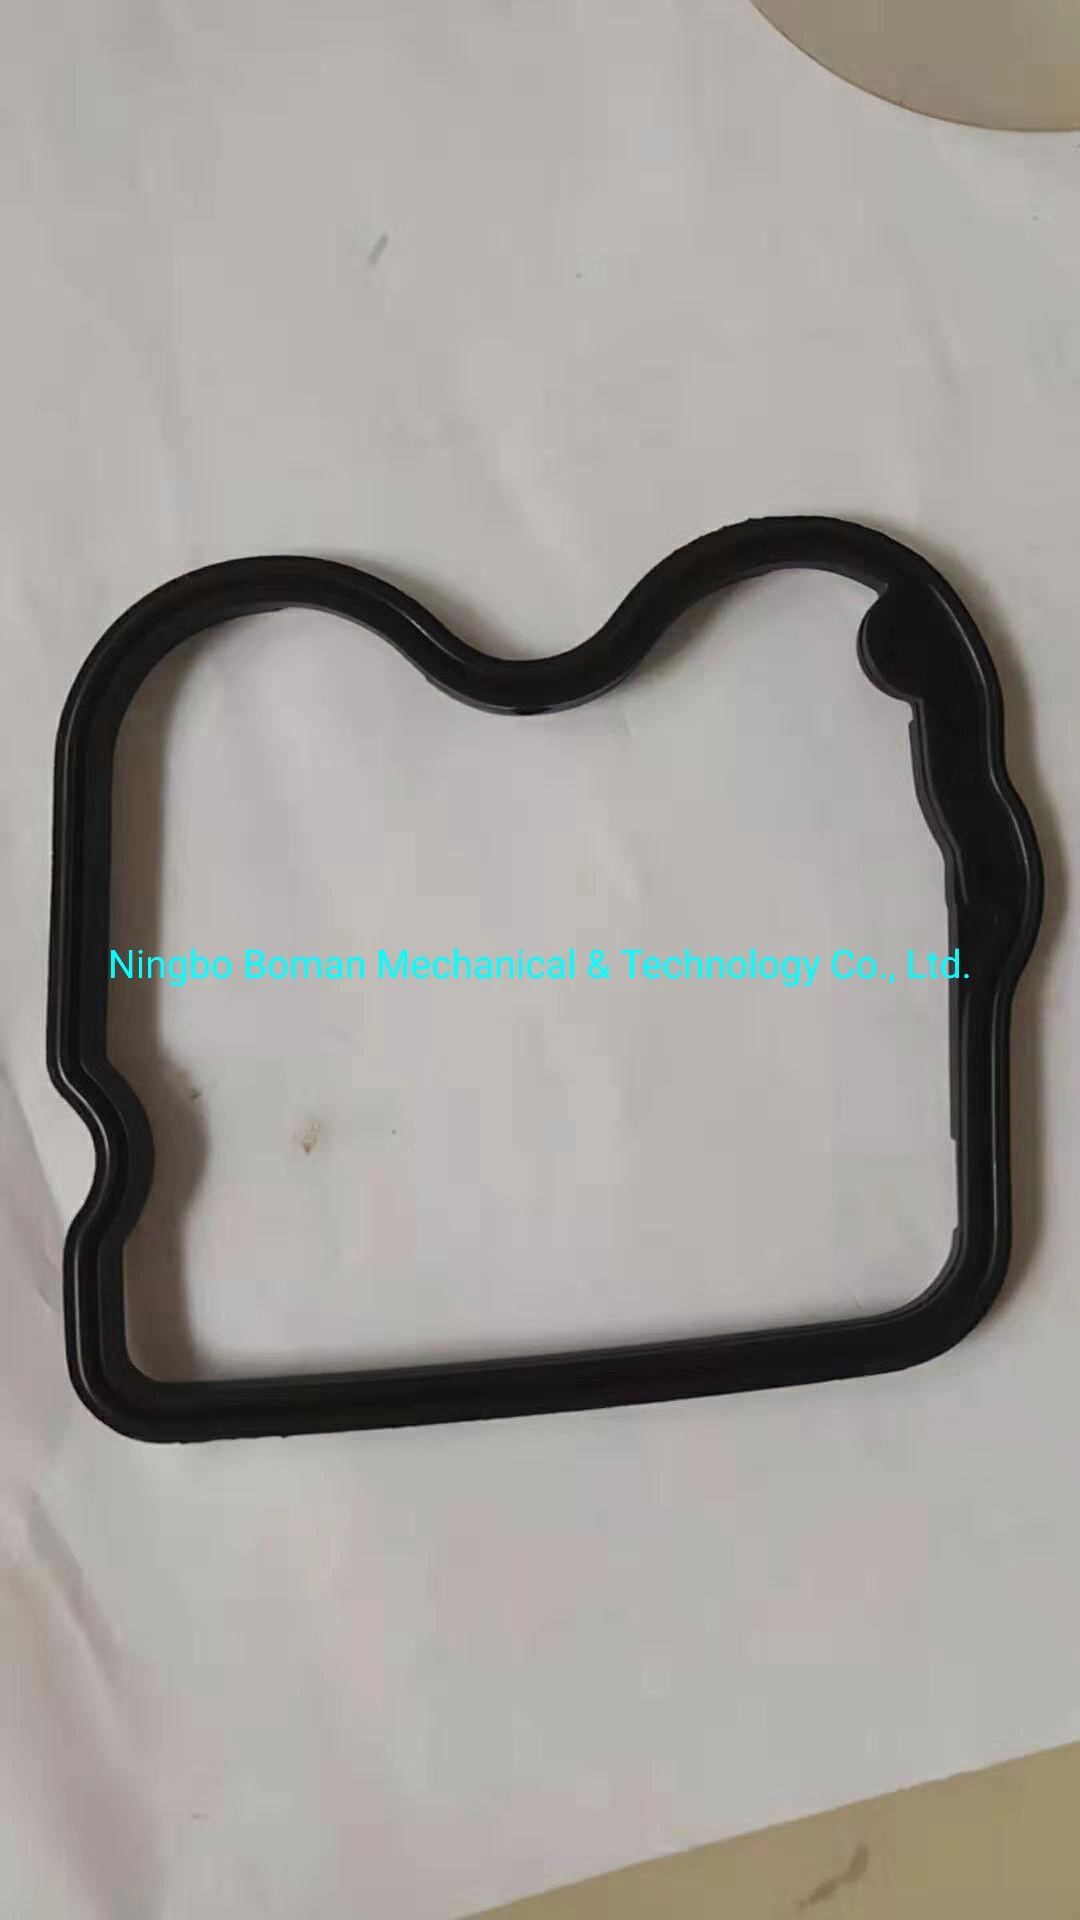 Honda Cg150 Rubber Gasket, NBR Engine Parts, Rubber Seal Washer